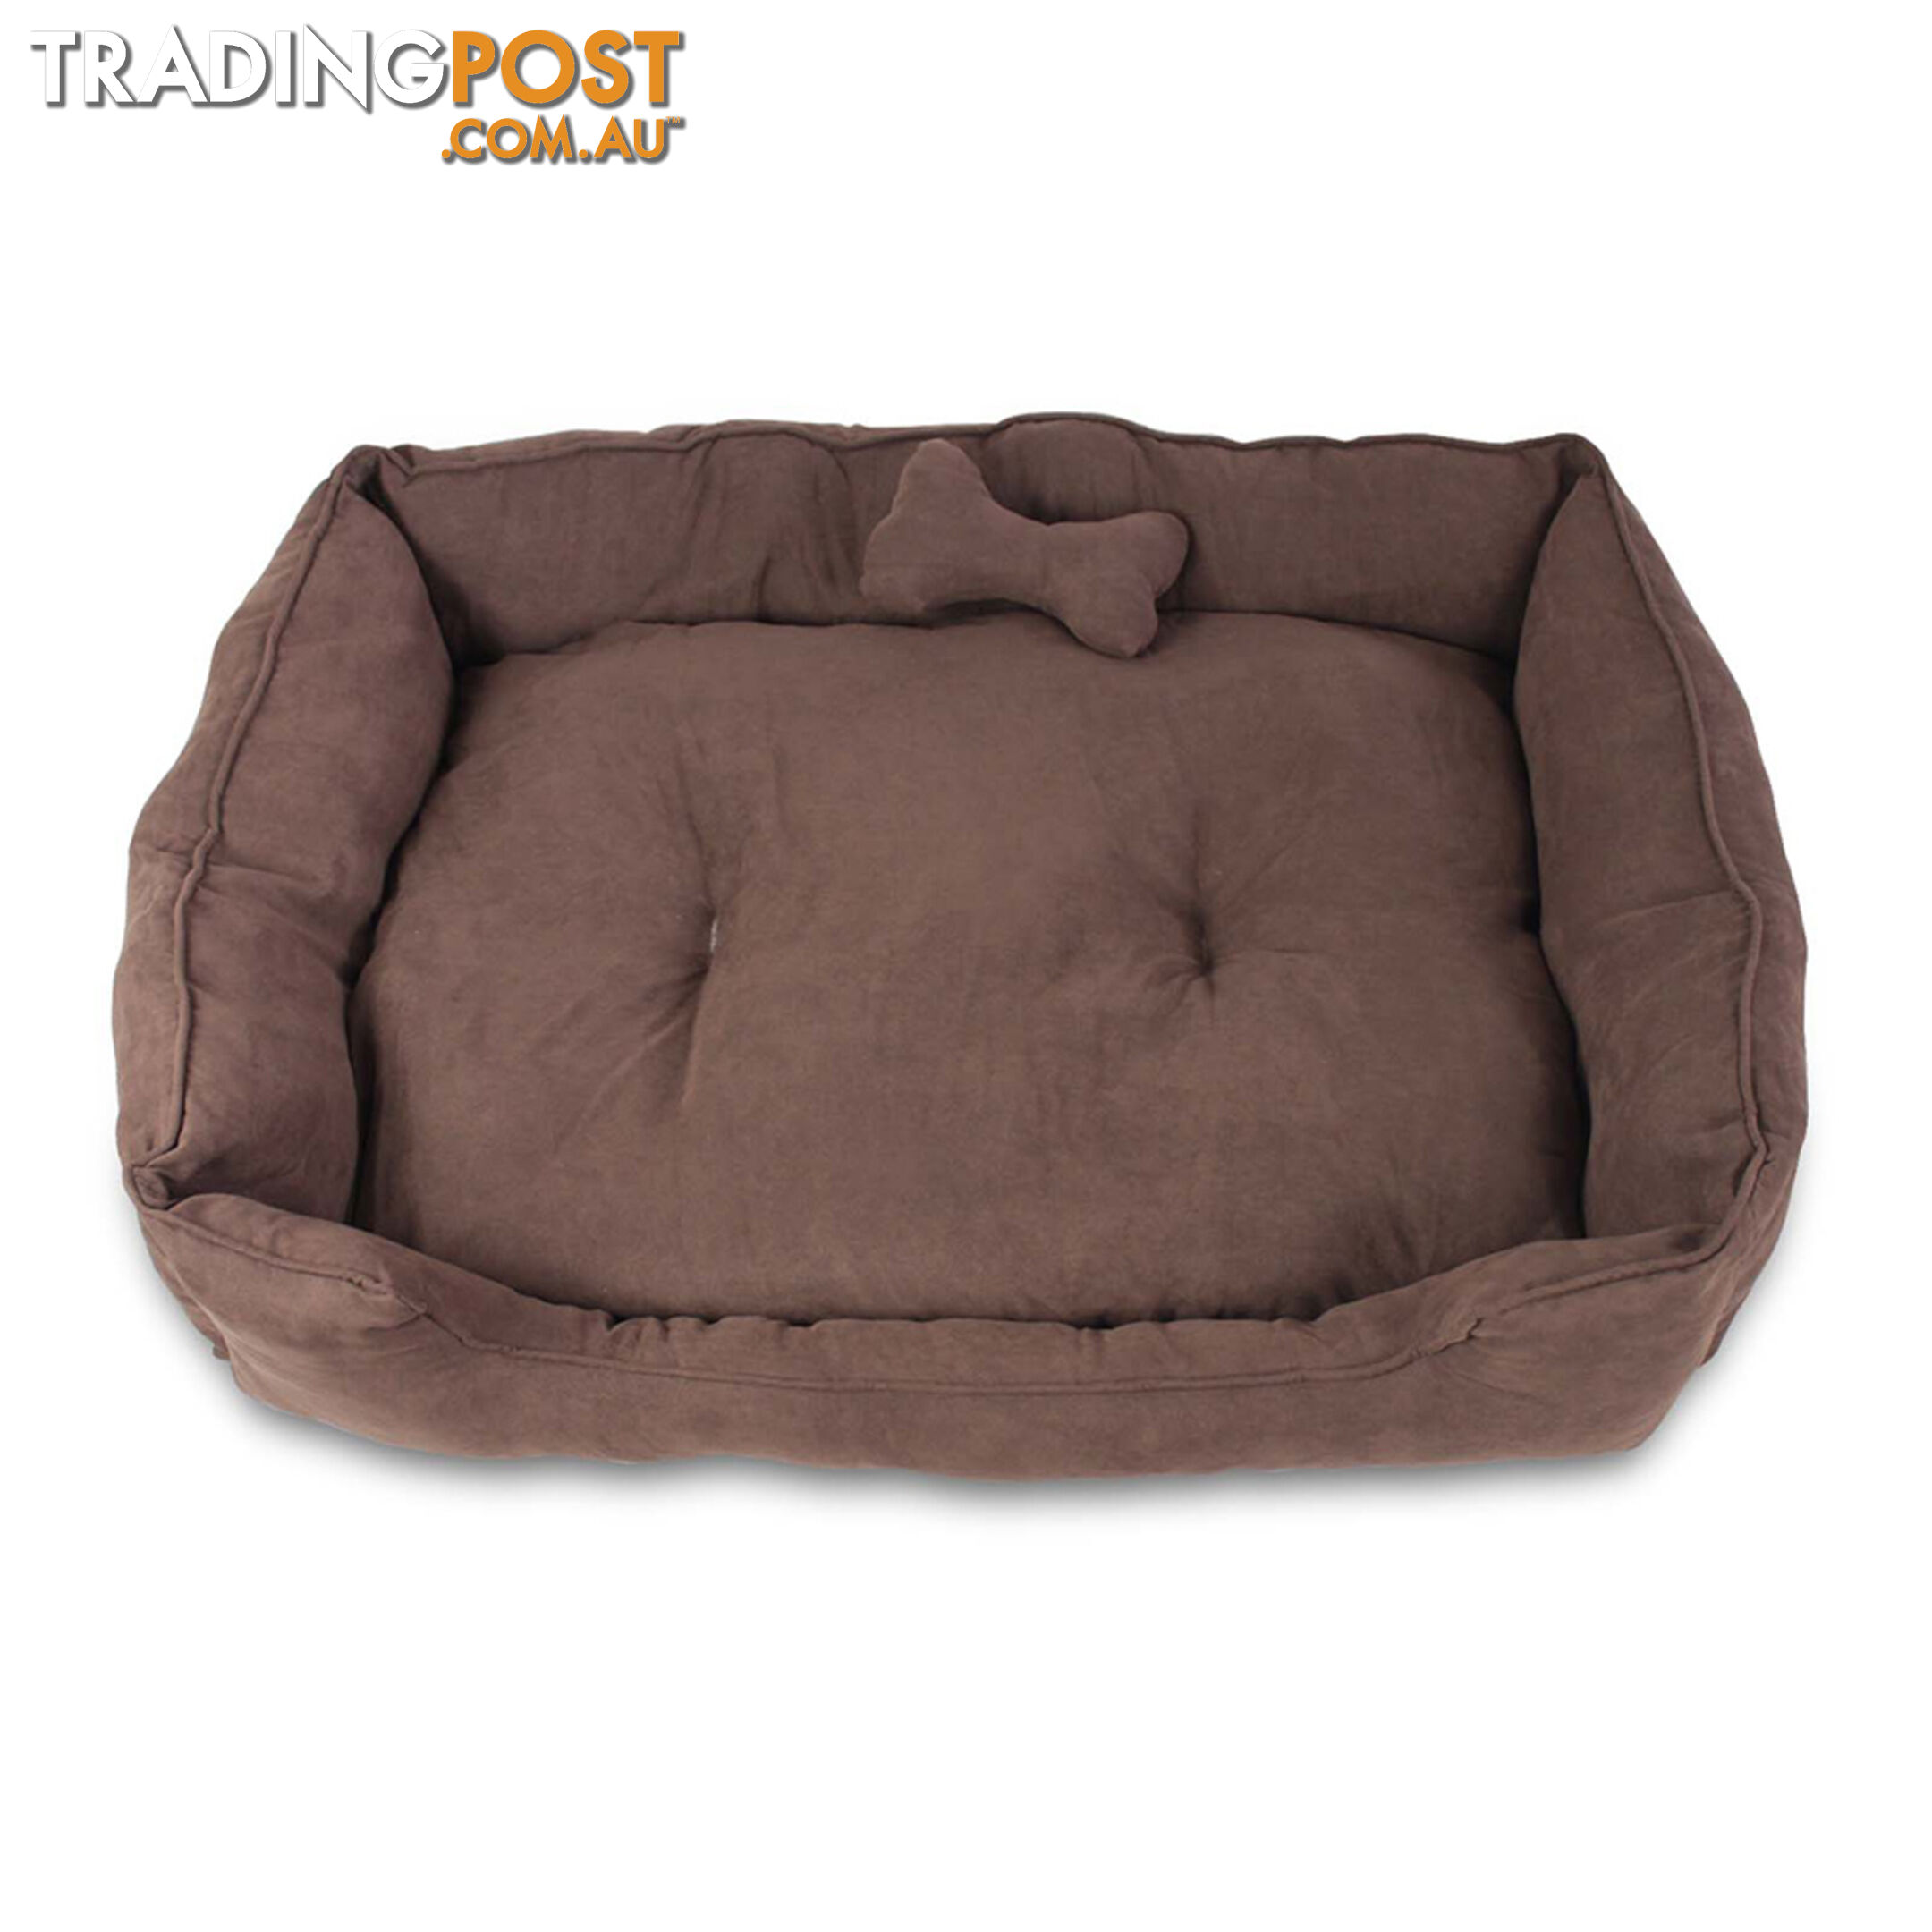 Deluxe Faux Suede Dog Bed Pet Cat Puppy Washable Soft Cushion Mat Basket XLarge